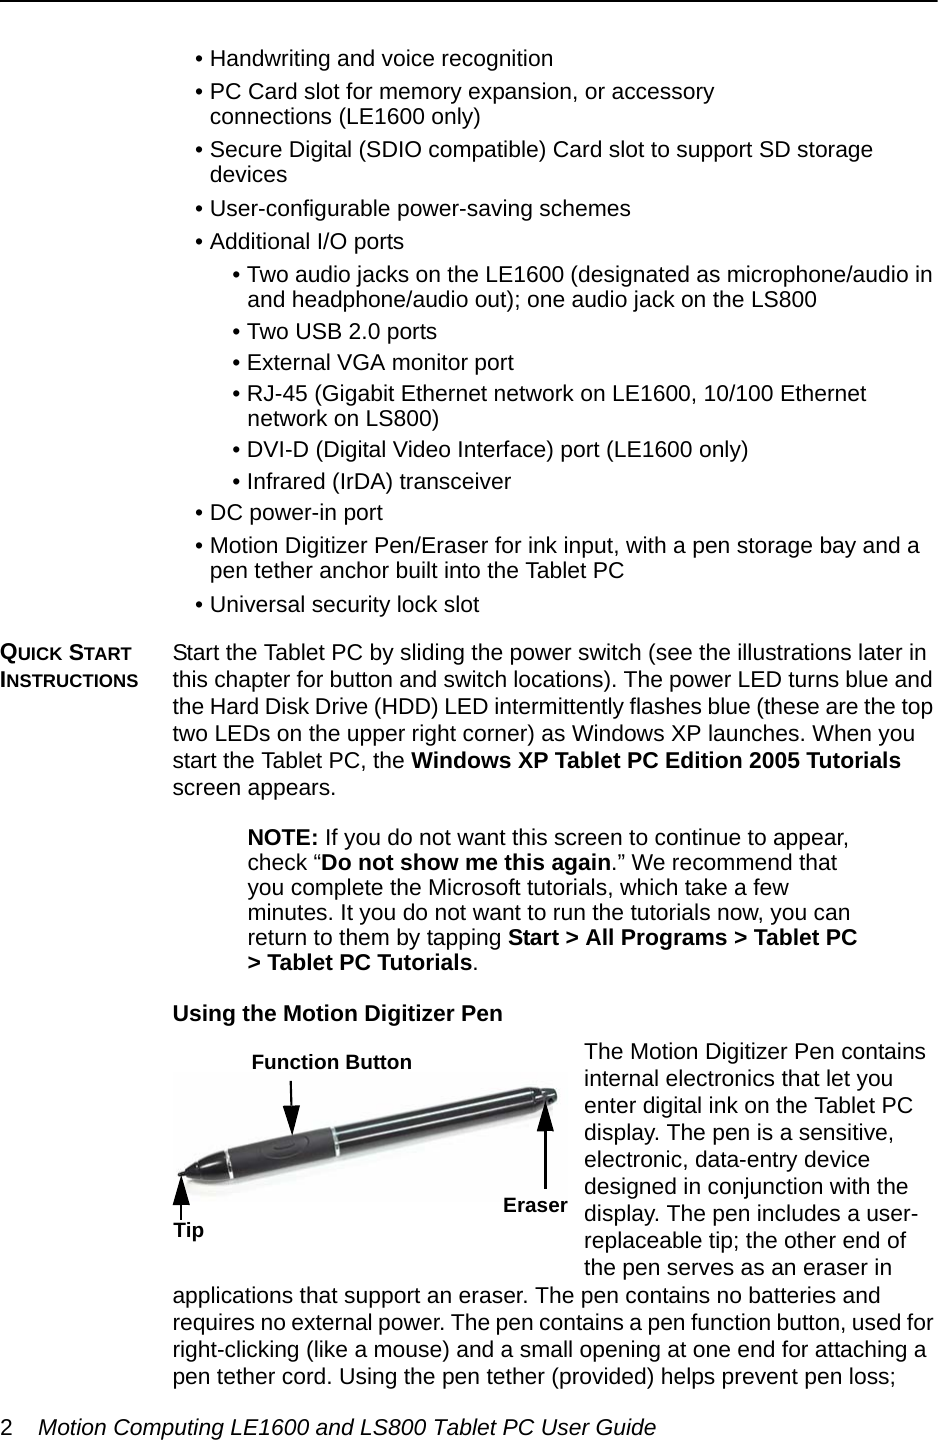 2Motion Computing LE1600 and LS800 Tablet PC User Guide• Handwriting and voice recognition• PC Card slot for memory expansion, or accessory connections (LE1600 only)• Secure Digital (SDIO compatible) Card slot to support SD storage devices• User-configurable power-saving schemes• Additional I/O ports • Two audio jacks on the LE1600 (designated as microphone/audio in and headphone/audio out); one audio jack on the LS800• Two USB 2.0 ports• External VGA monitor port• RJ-45 (Gigabit Ethernet network on LE1600, 10/100 Ethernet network on LS800)• DVI-D (Digital Video Interface) port (LE1600 only)• Infrared (IrDA) transceiver• DC power-in port• Motion Digitizer Pen/Eraser for ink input, with a pen storage bay and a pen tether anchor built into the Tablet PC• Universal security lock slotQUICK START INSTRUCTIONSStart the Tablet PC by sliding the power switch (see the illustrations later in this chapter for button and switch locations). The power LED turns blue and the Hard Disk Drive (HDD) LED intermittently flashes blue (these are the top two LEDs on the upper right corner) as Windows XP launches. When you start the Tablet PC, the Windows XP Tablet PC Edition 2005 Tutorials screen appears.NOTE: If you do not want this screen to continue to appear, check “Do not show me this again.” We recommend that you complete the Microsoft tutorials, which take a few minutes. It you do not want to run the tutorials now, you can return to them by tapping Start &gt; All Programs &gt; Tablet PC &gt; Tablet PC Tutorials.Using the Motion Digitizer PenThe Motion Digitizer Pen contains internal electronics that let you enter digital ink on the Tablet PC display. The pen is a sensitive, electronic, data-entry device designed in conjunction with the display. The pen includes a user-replaceable tip; the other end of the pen serves as an eraser in applications that support an eraser. The pen contains no batteries and requires no external power. The pen contains a pen function button, used for right-clicking (like a mouse) and a small opening at one end for attaching a pen tether cord. Using the pen tether (provided) helps prevent pen loss; Eraser Function ButtonTip